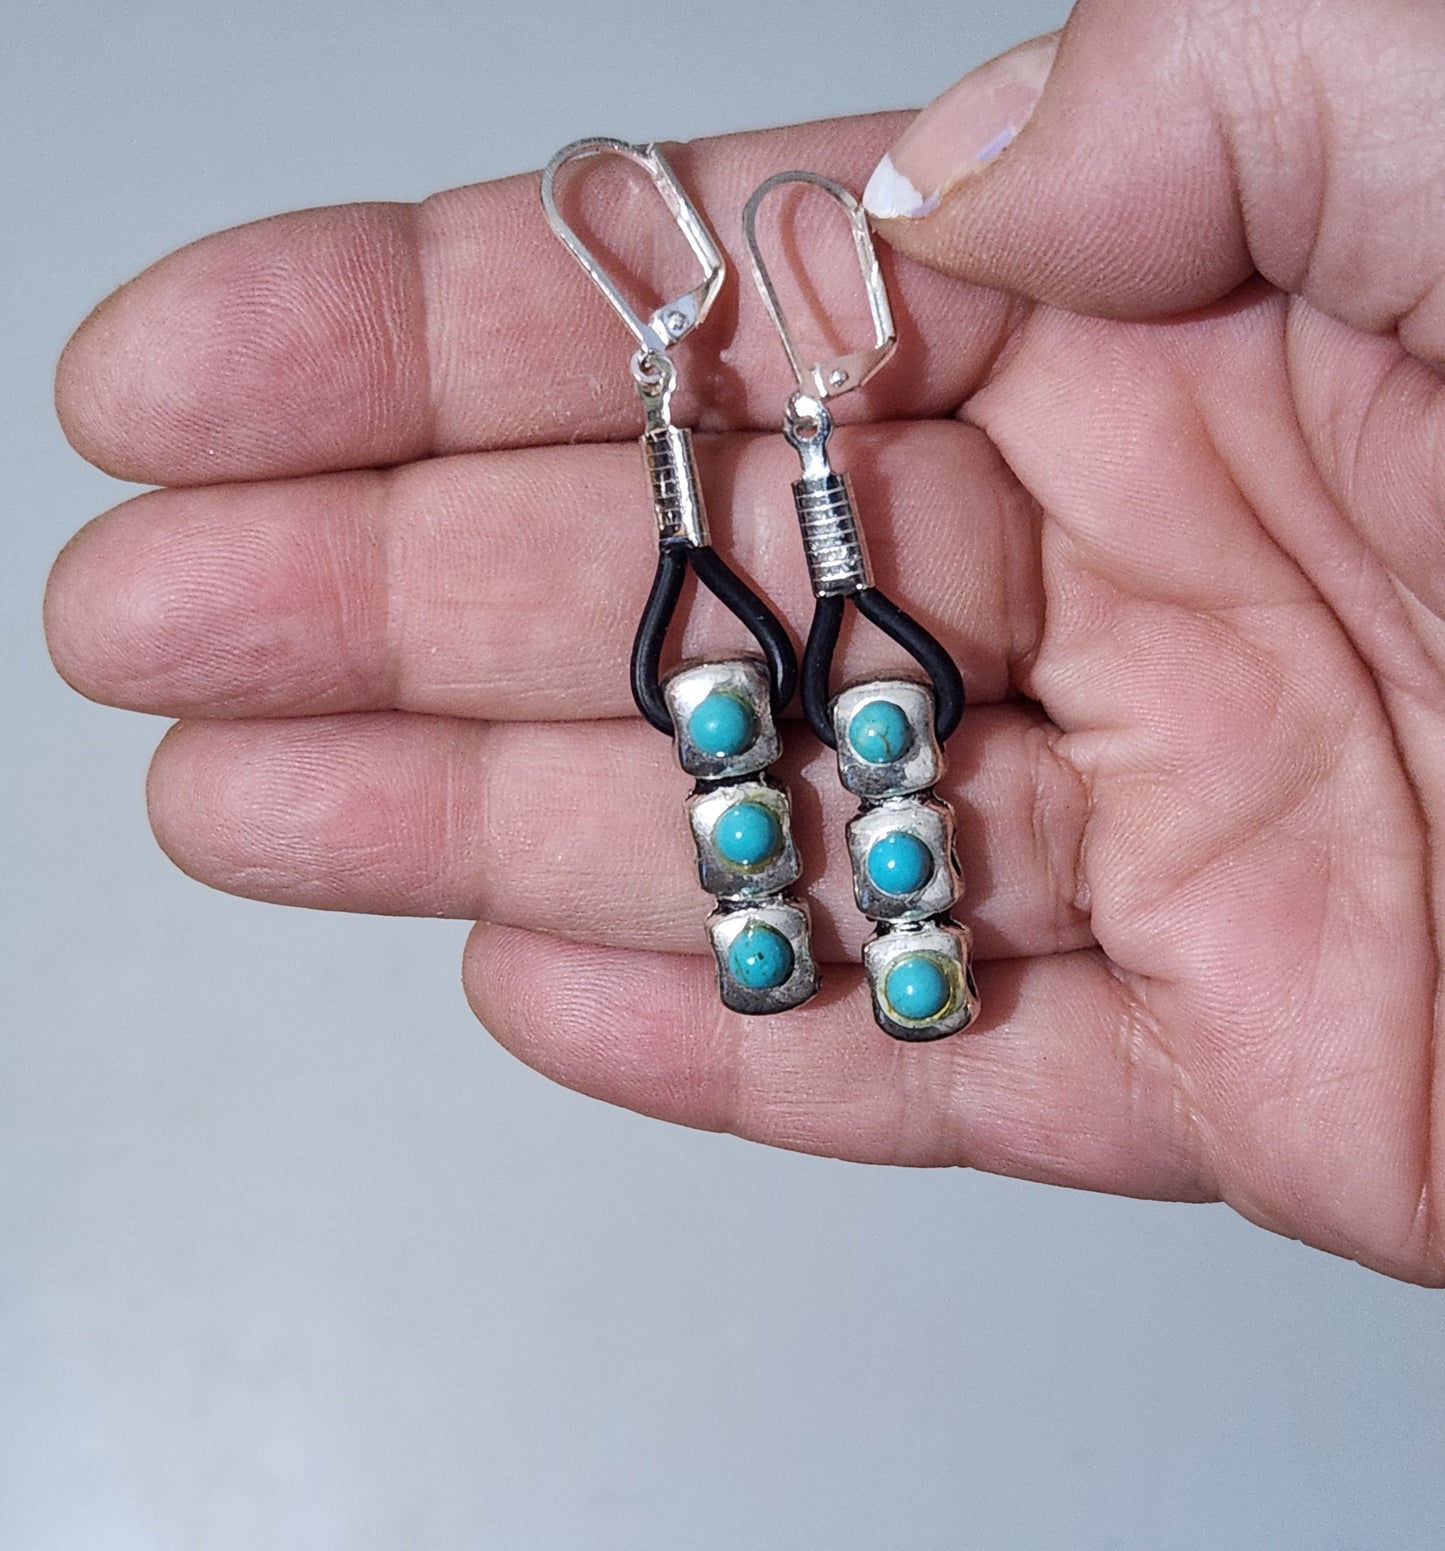 3 TURQUOISE STONE SILVER EARRINGS